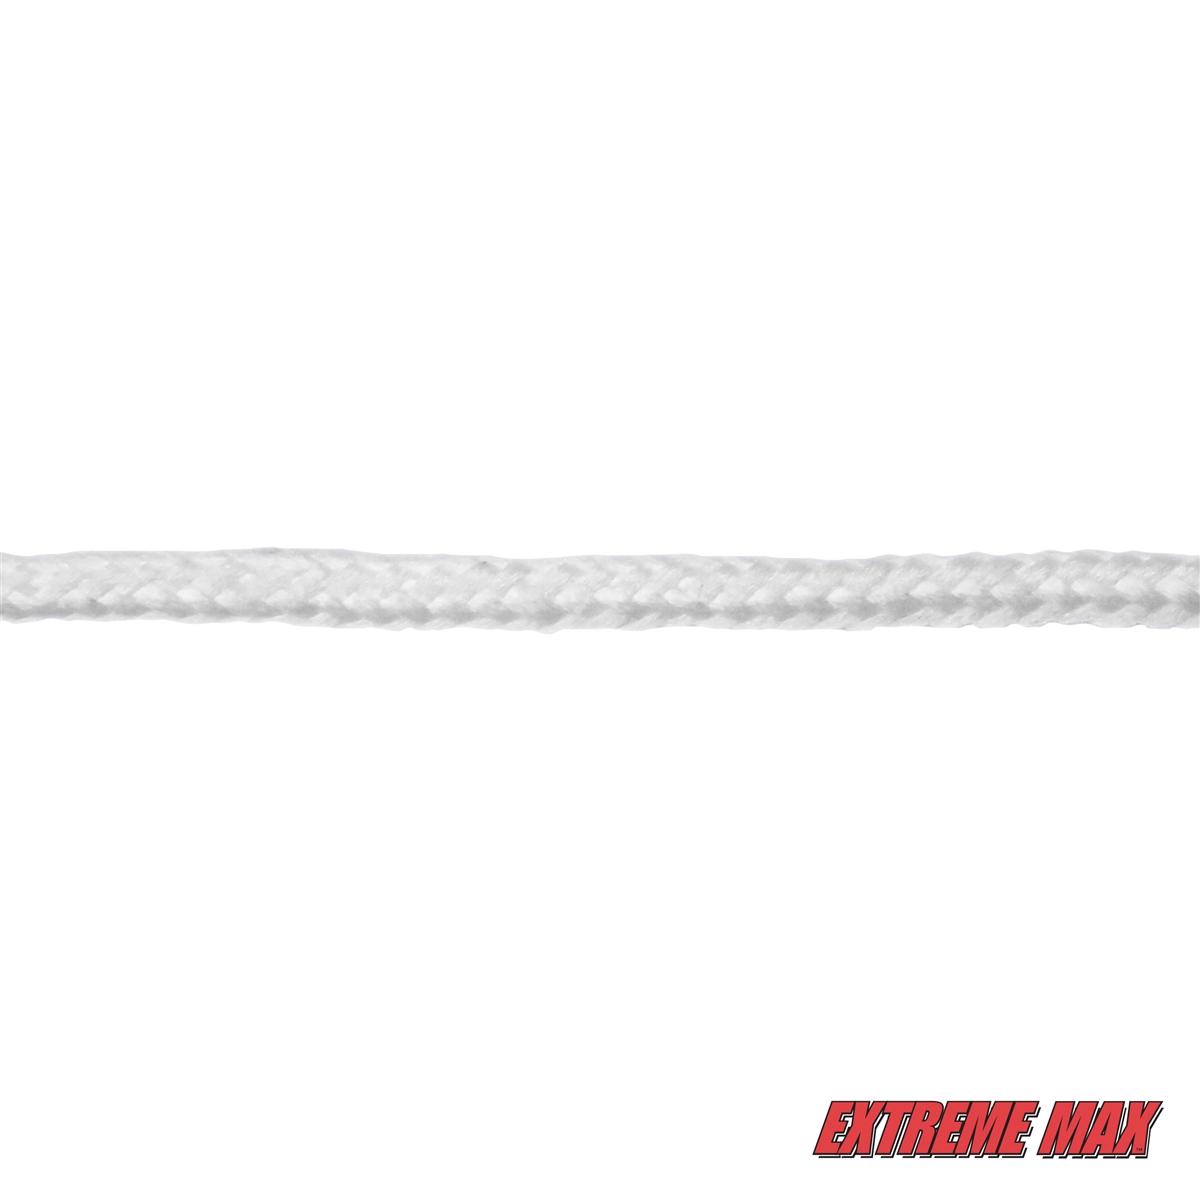 Extreme Max 3008.0445 White 7//32 x 100 Braided Cotton//Polyester Clothesline